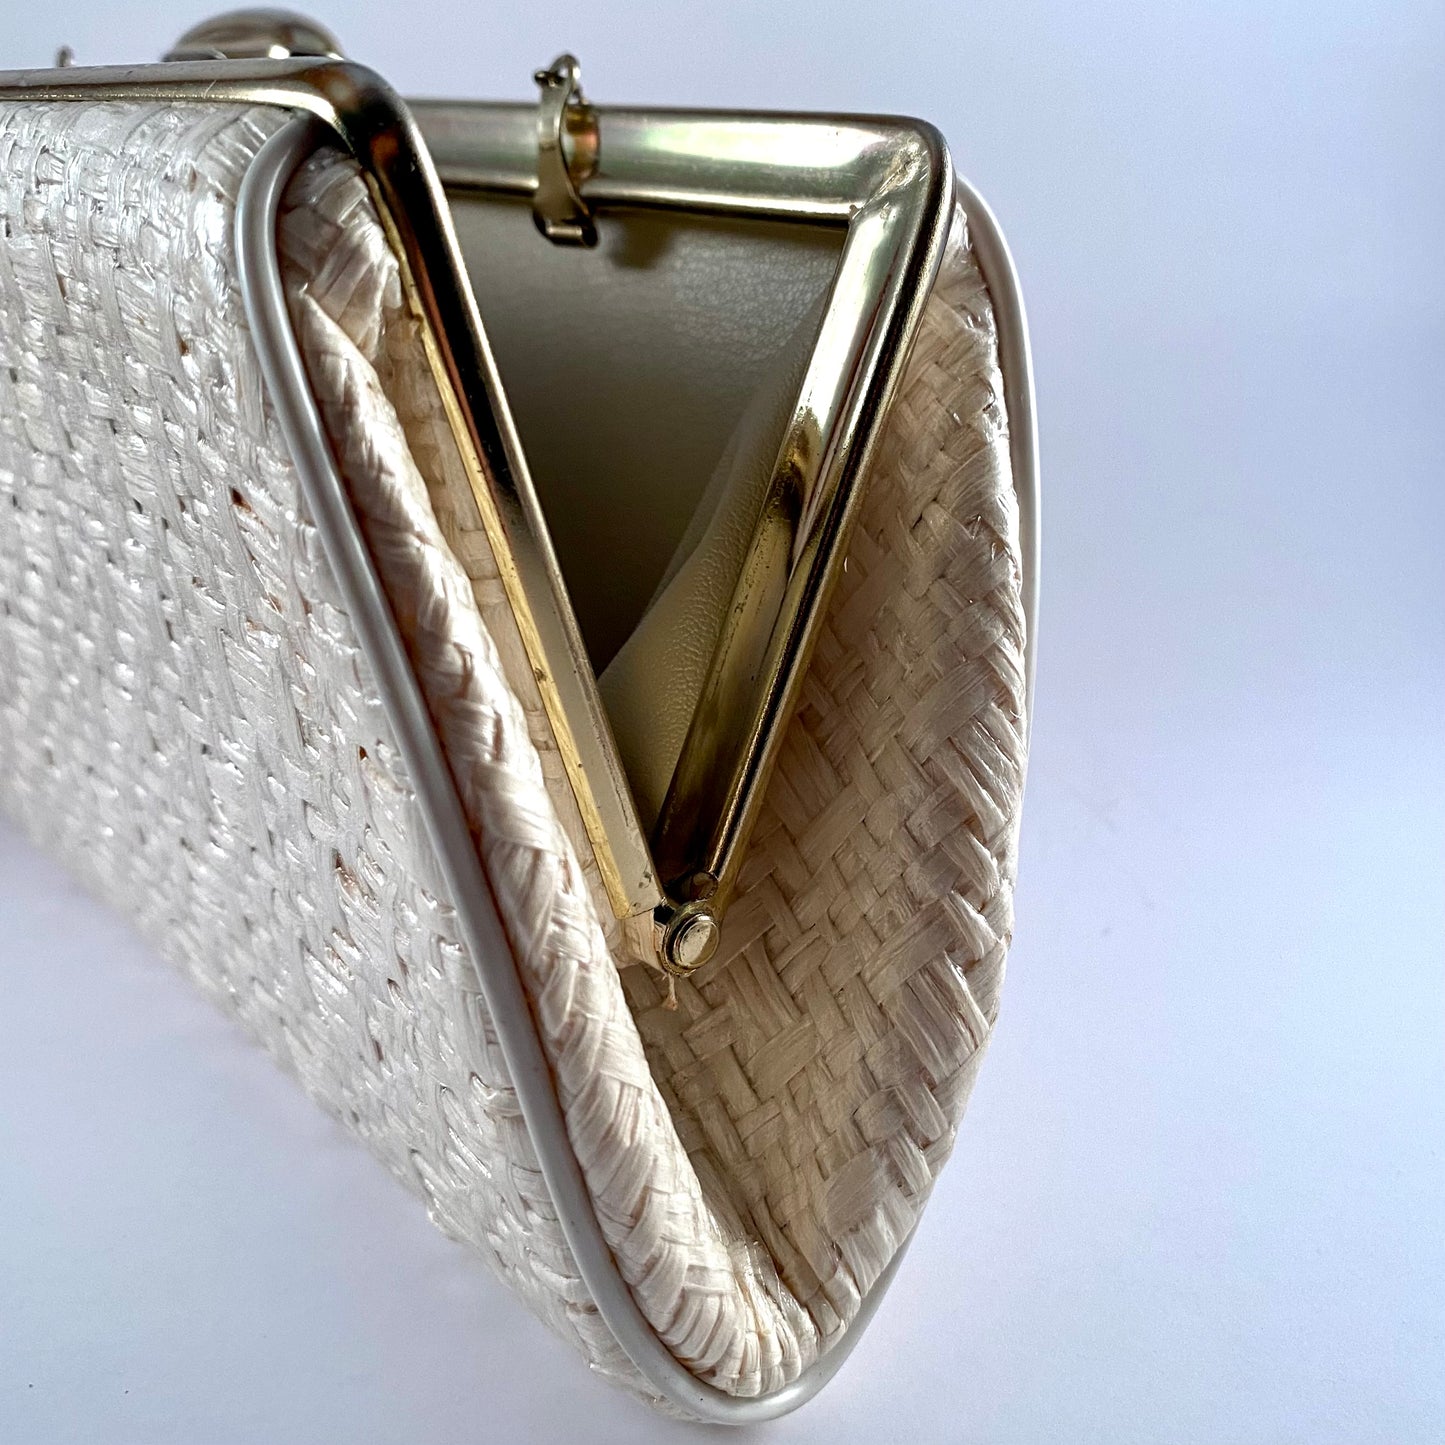 1960s Woven Ivory Clutch With Chain Handle Option